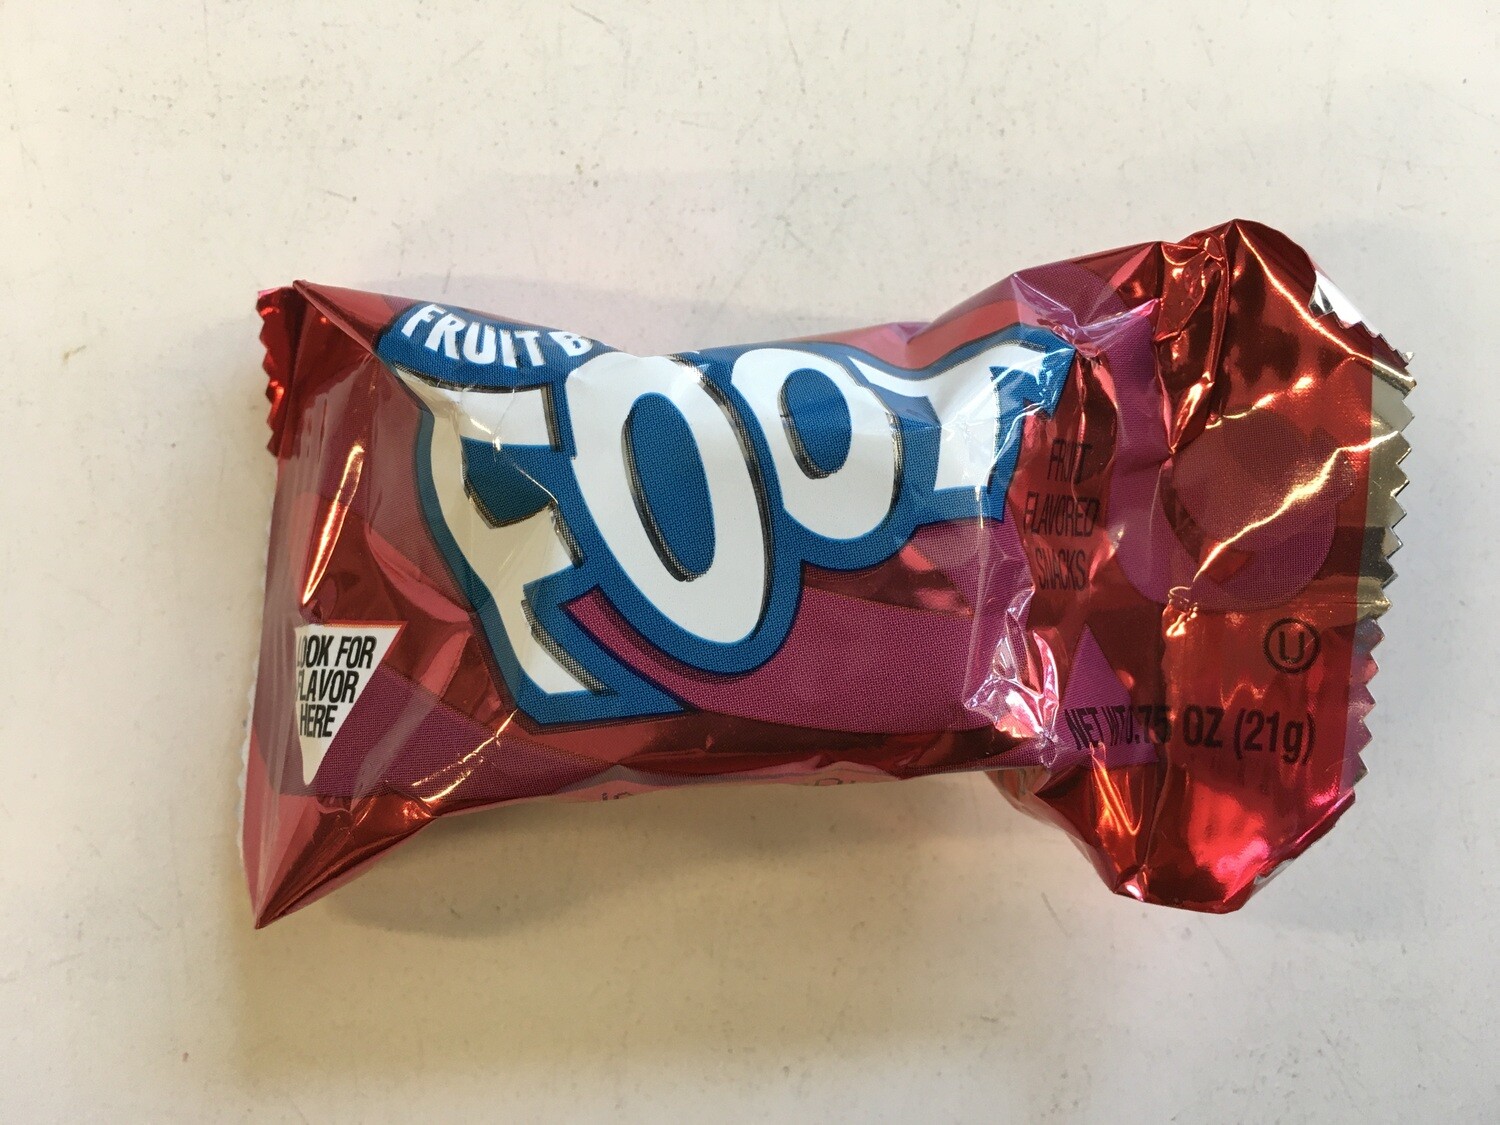 Candy / Snack / Fruit by the Foot